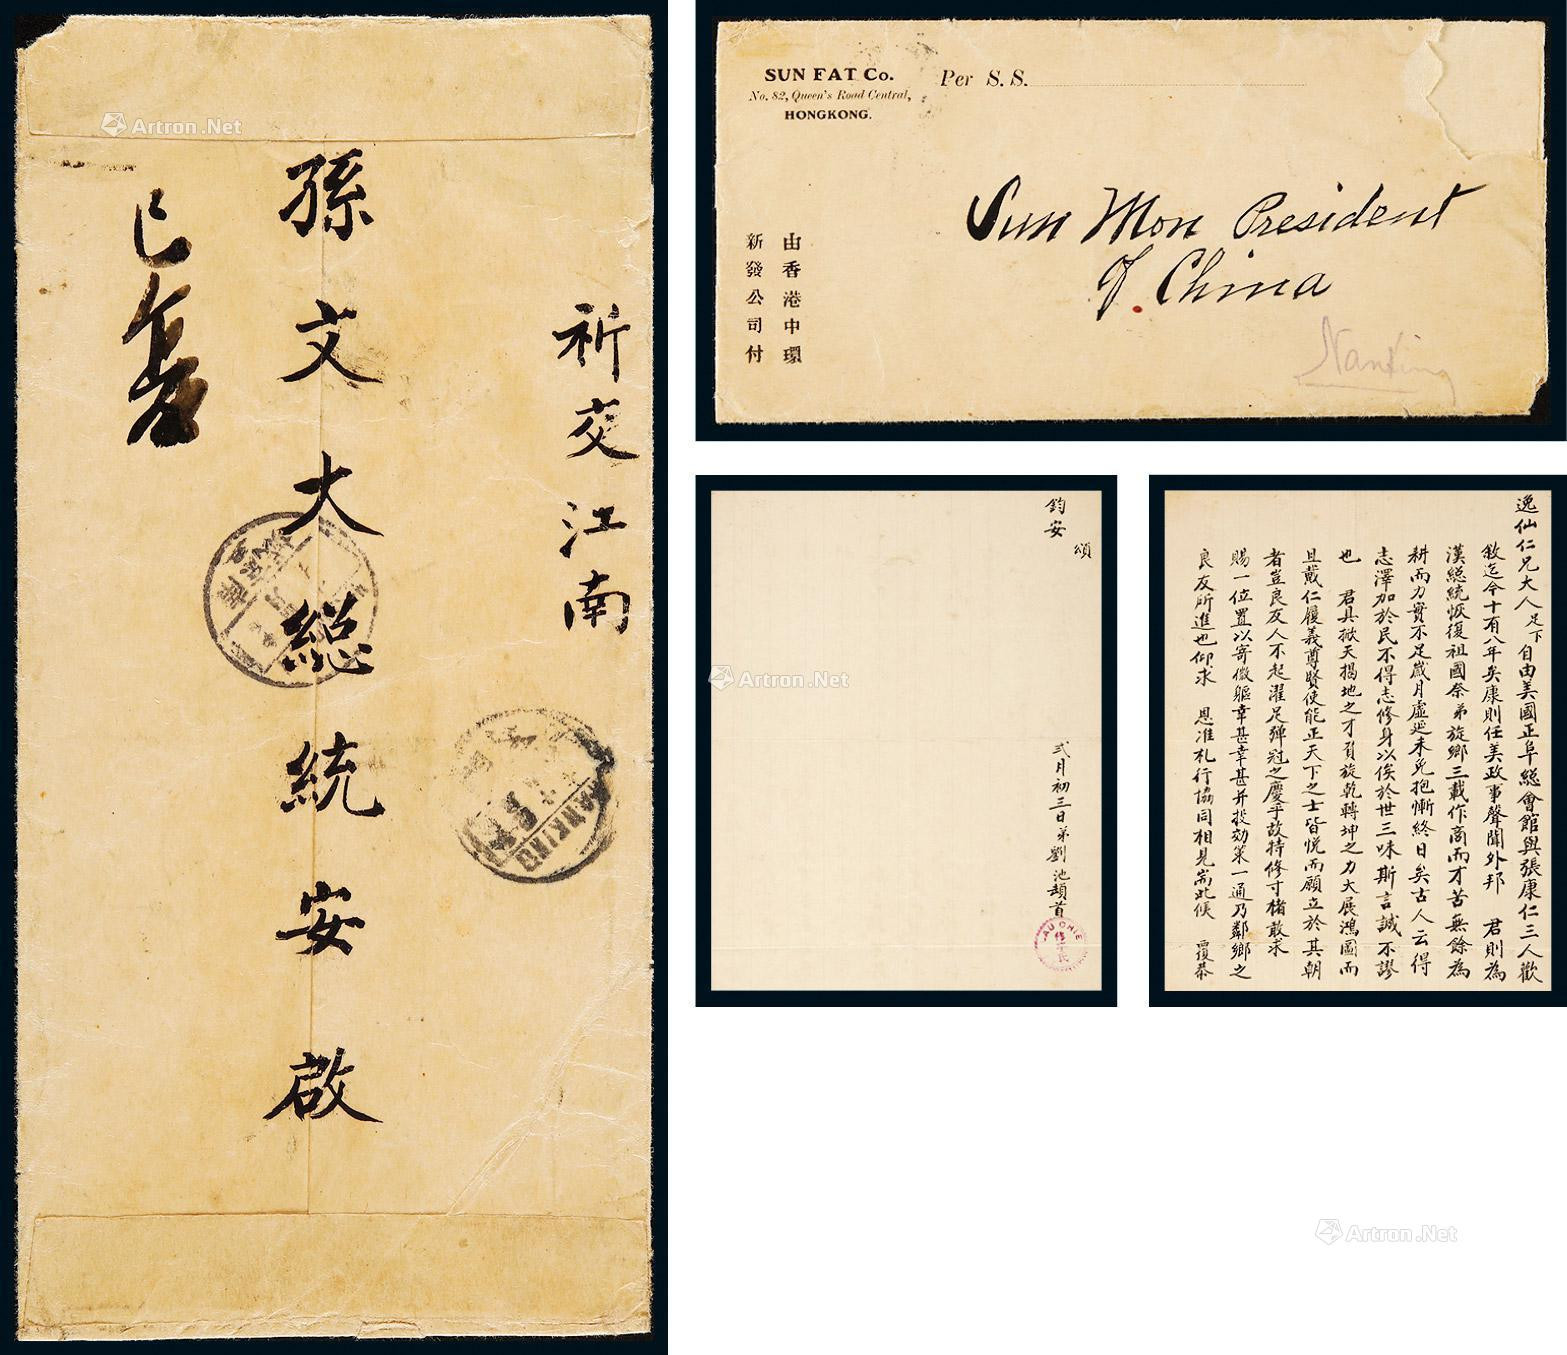 One letter of two pages autographed by Sun yat-sen from Liu Chi, with original cover<br>Sun Yat-sen autographed“Reply”on the back of the envelope